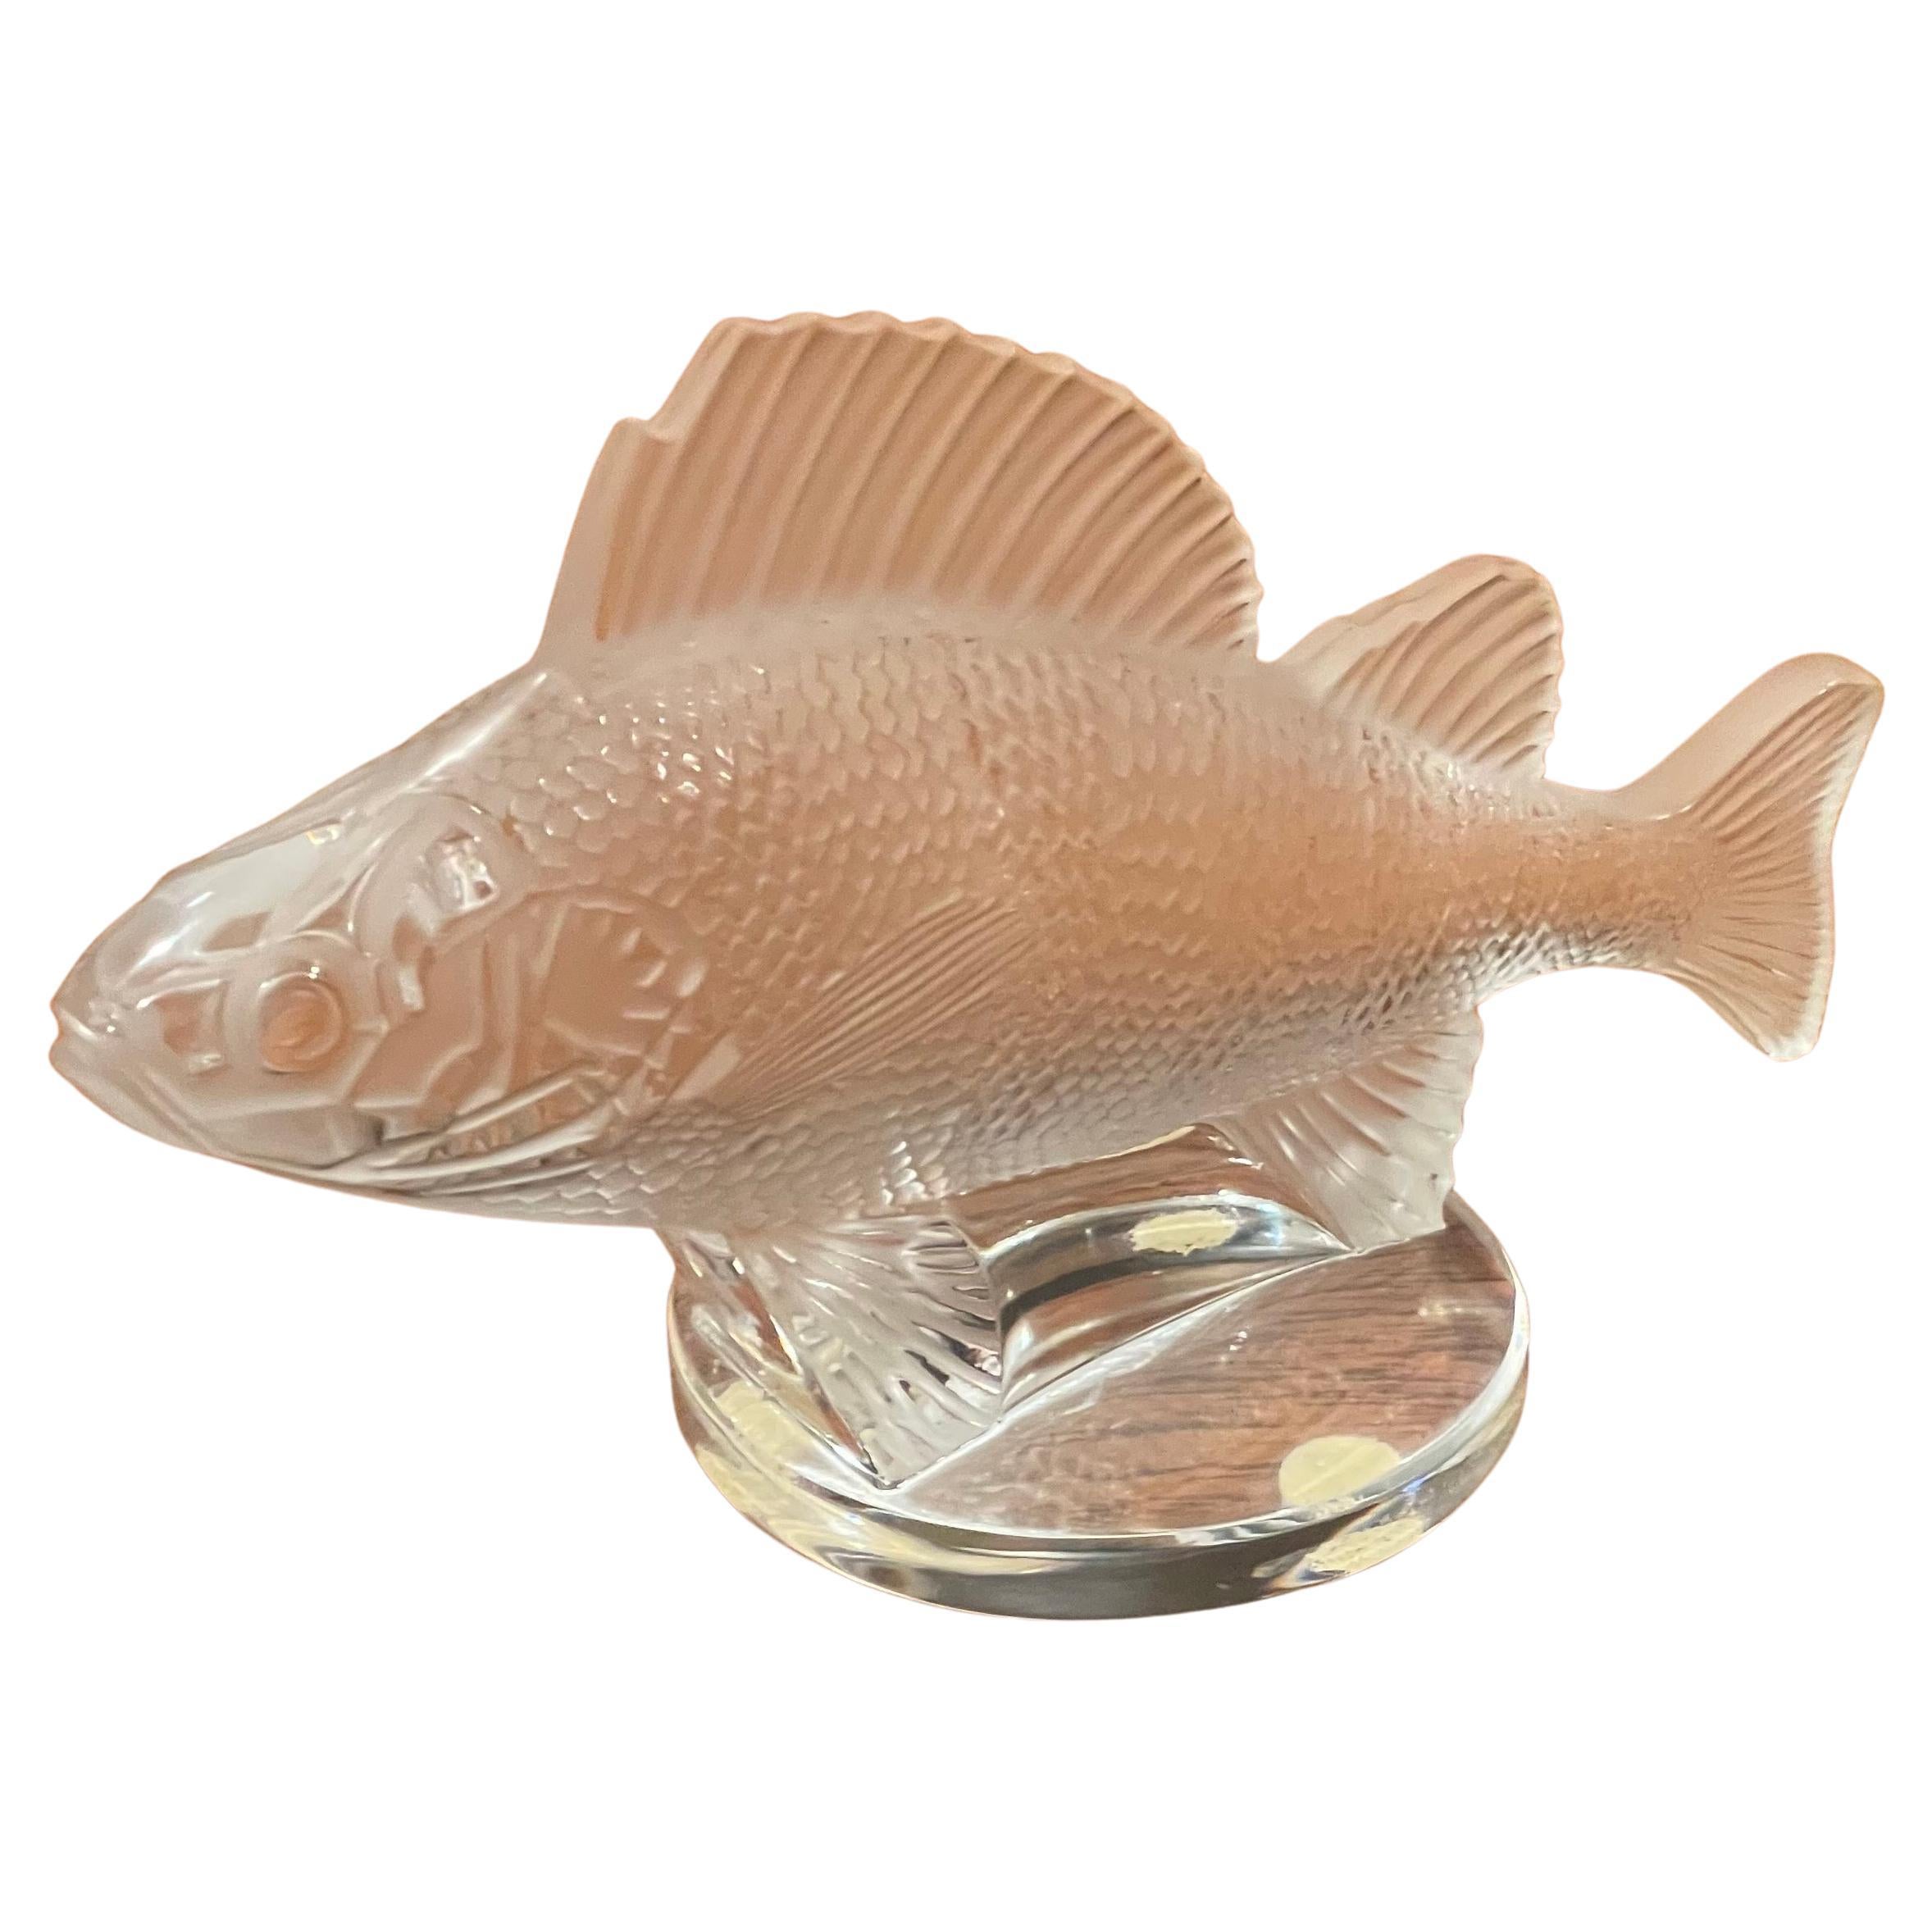 A beautiful frosted crystal perch fish sculpture on base by Lalique of France , circa 1990s. This gorgeous piece is in very good vintage condition with no chips or cracks and measures 6.25